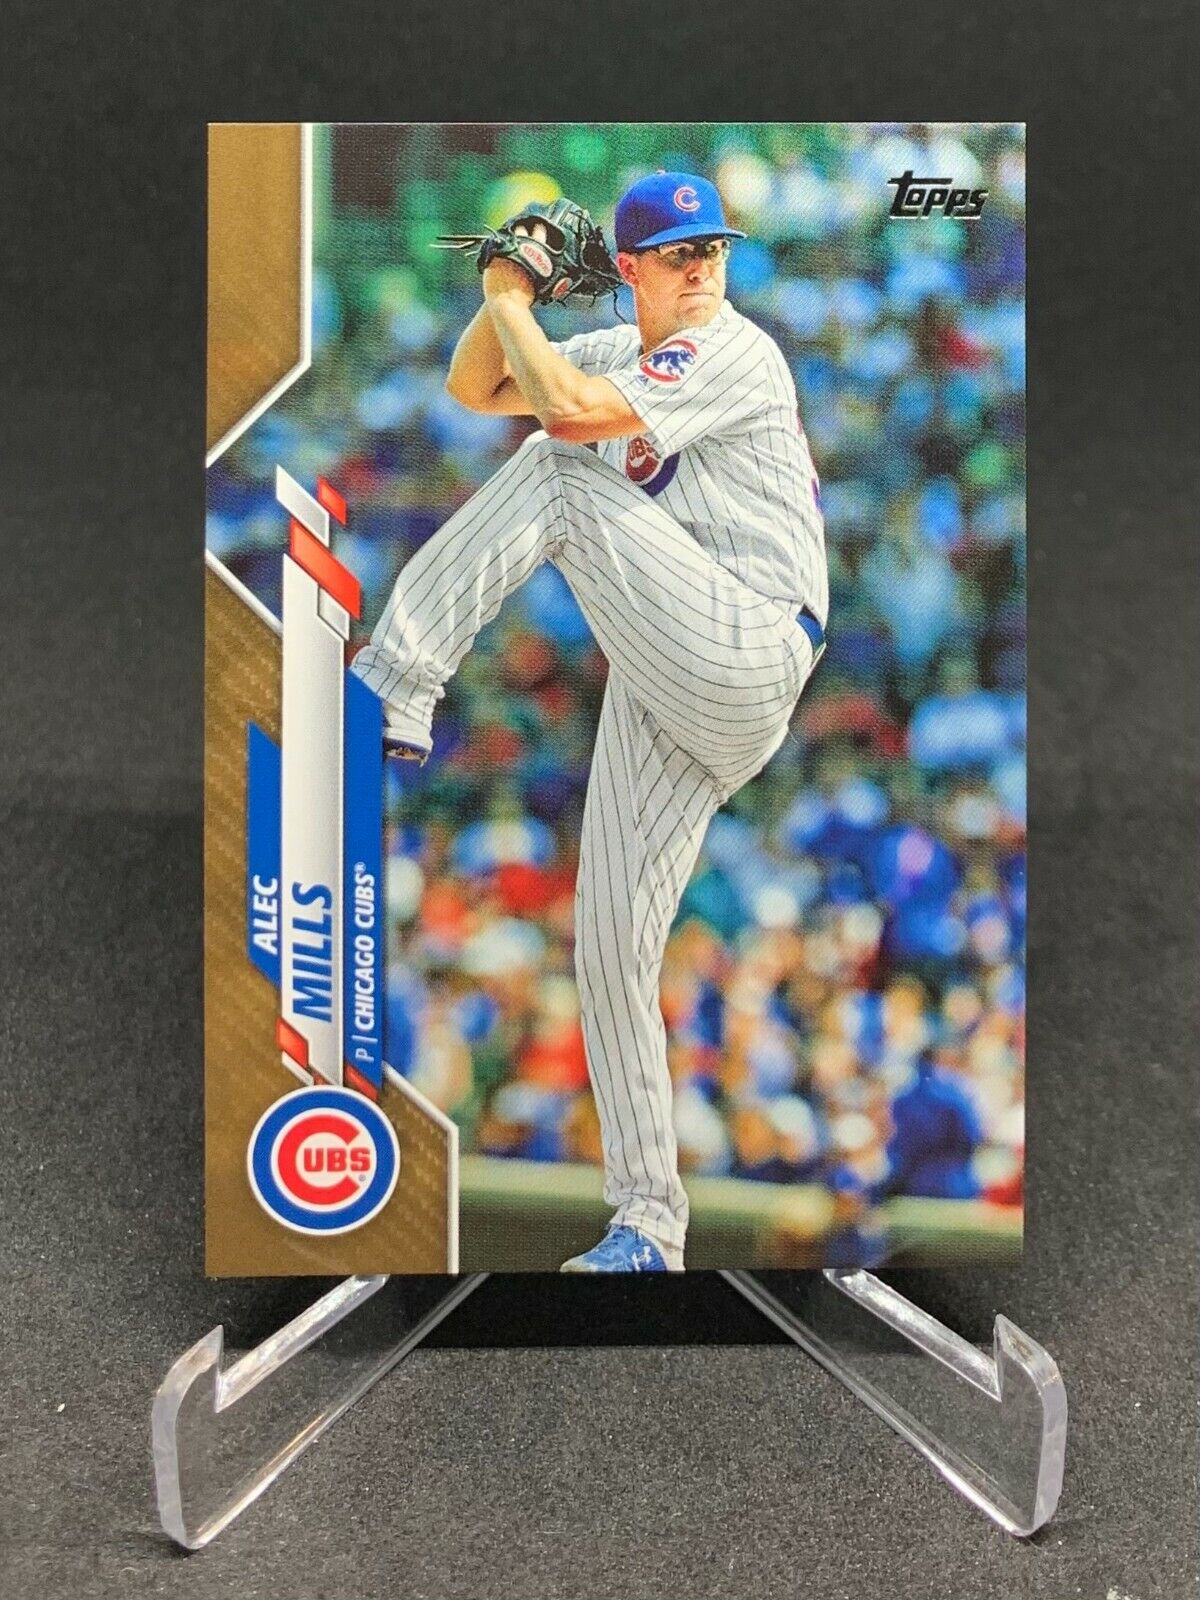 2020 Topps Update ALEC MILLS Gold Parallel /2020 Rookie Card RC #U-220 Cubs